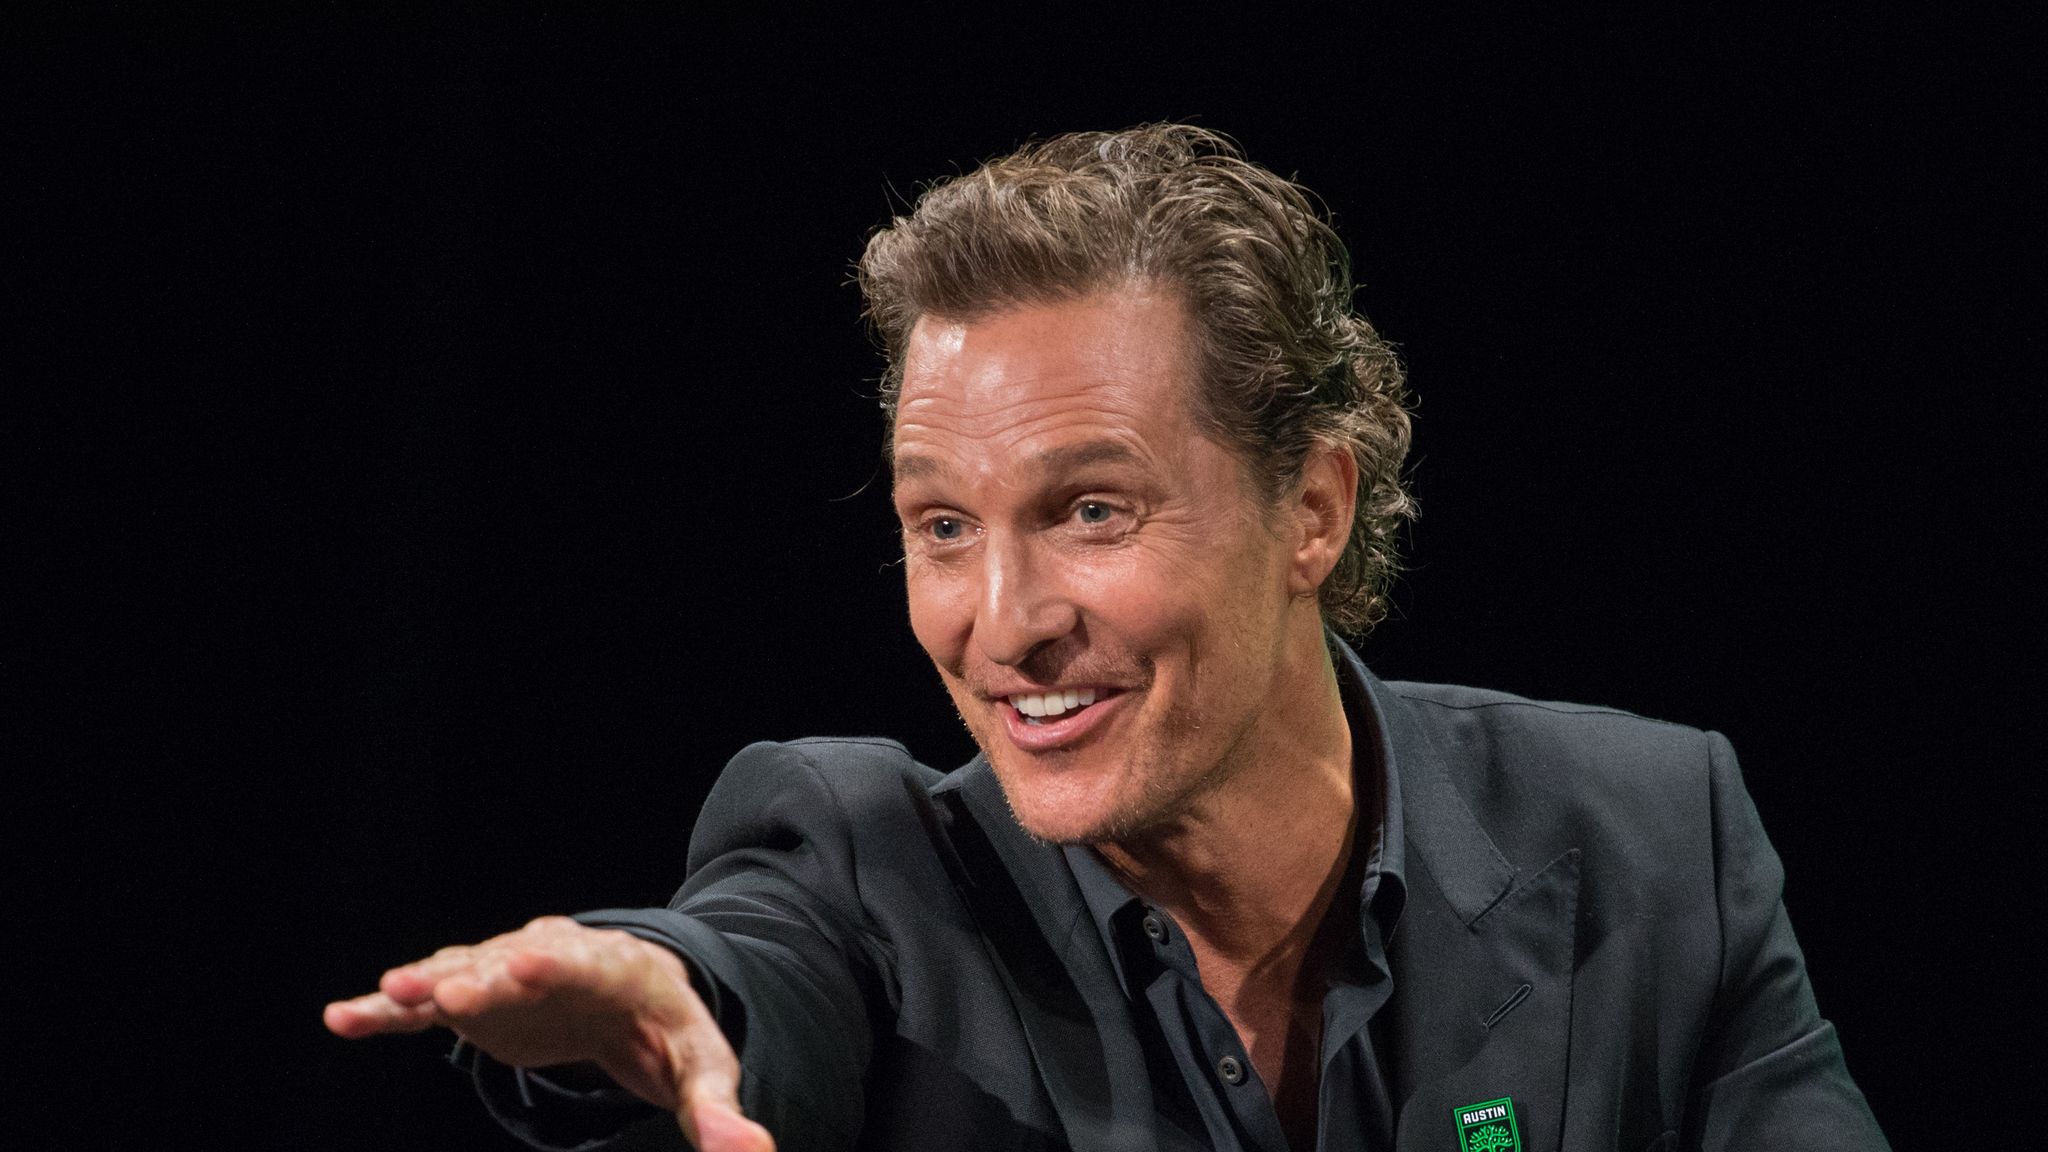 Professor McConaughey Actor joins teaching staff at his old university